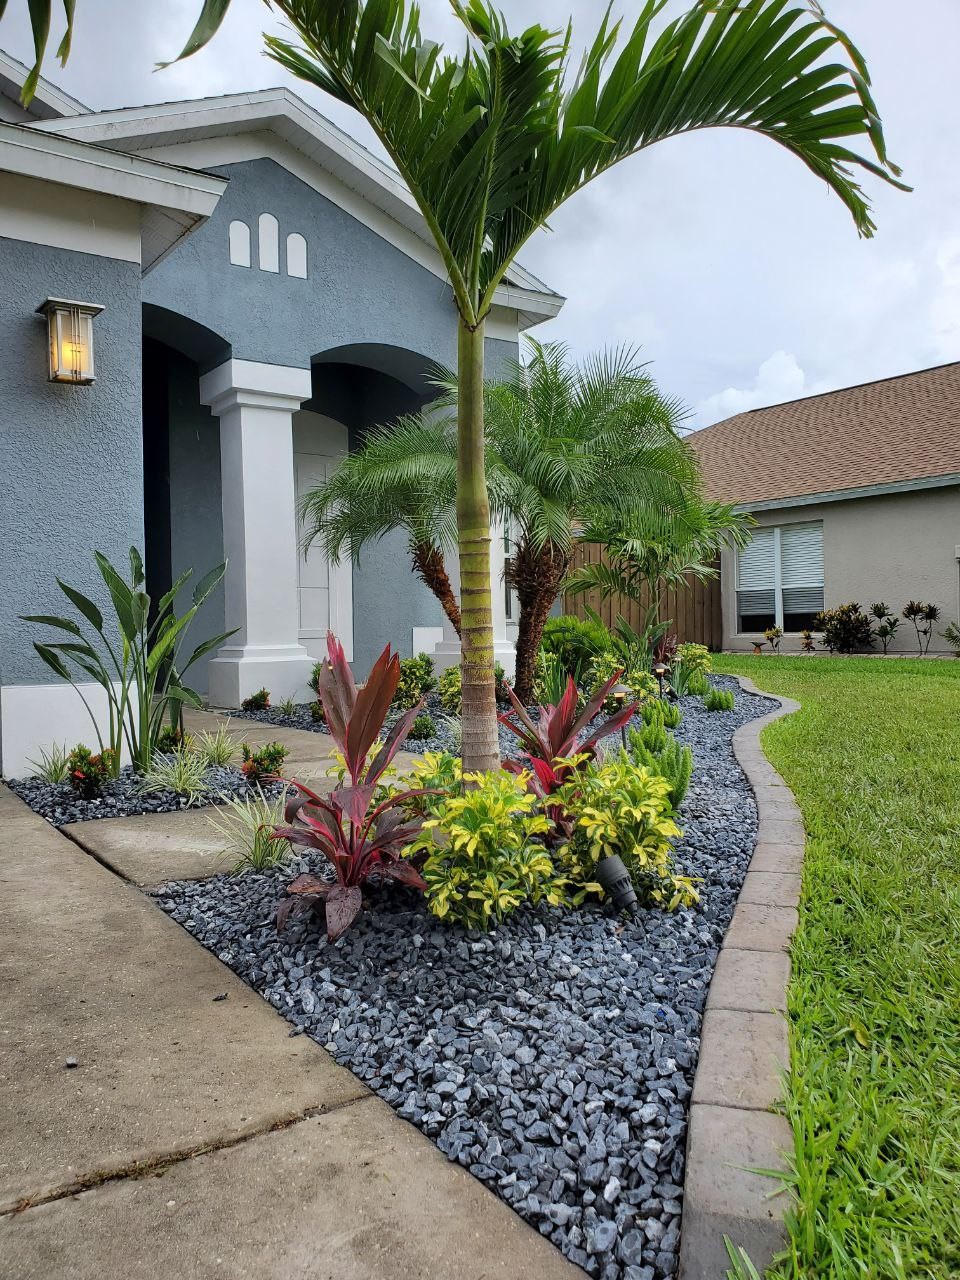 Yard Design Landscaping Company in Tampa | Custom Landscape Design Services in Tampa